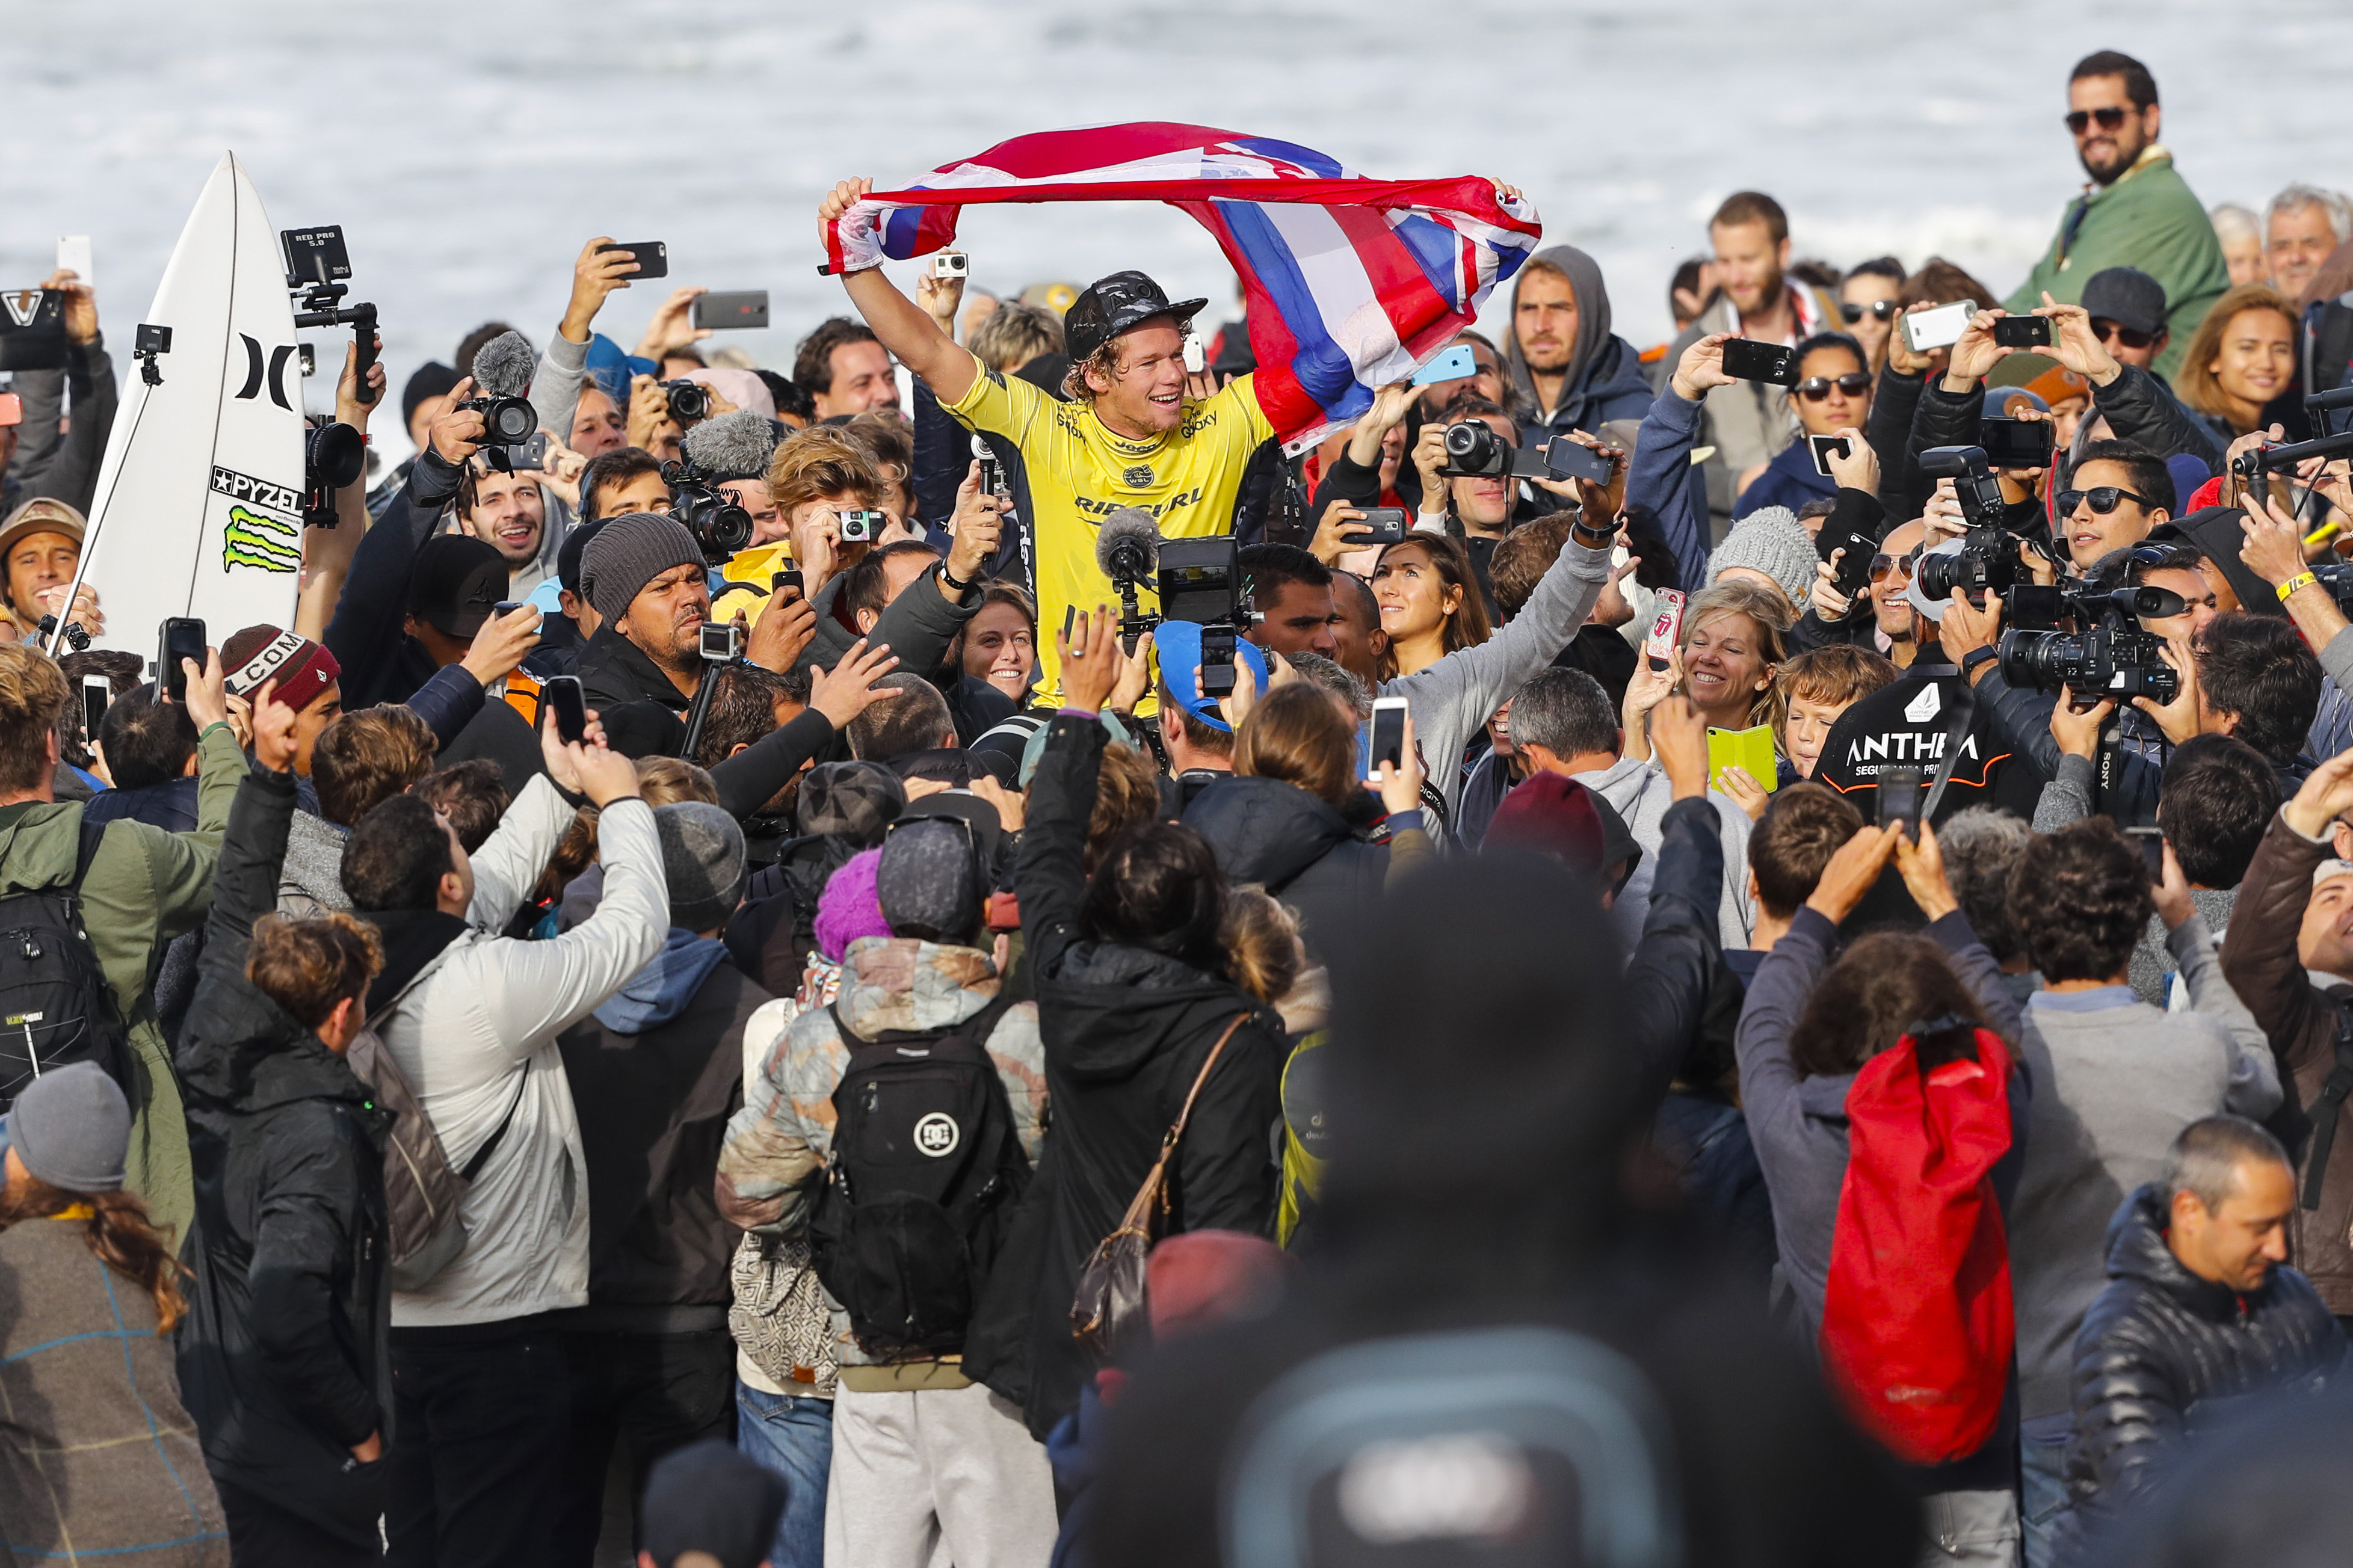 John John Florence celebrating his World Title Victory and event victory during the Meo Rip Curl Pro Portugal. Photo: WSL 